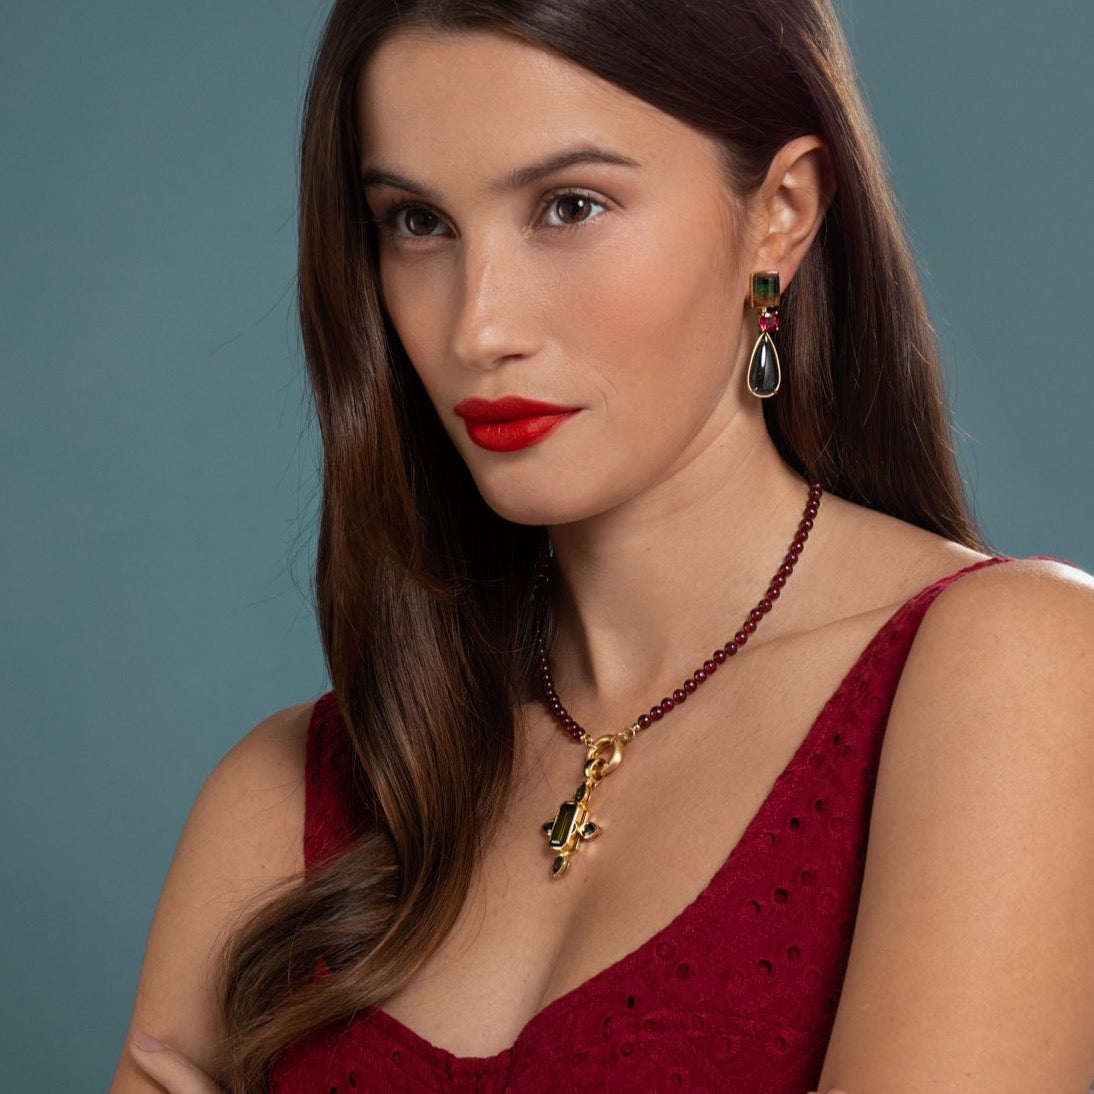 Lilian wearing the Tourmaline Earrings and Ruby and Tourmaline Cross Necklace by McFarlane Fine Jewellery